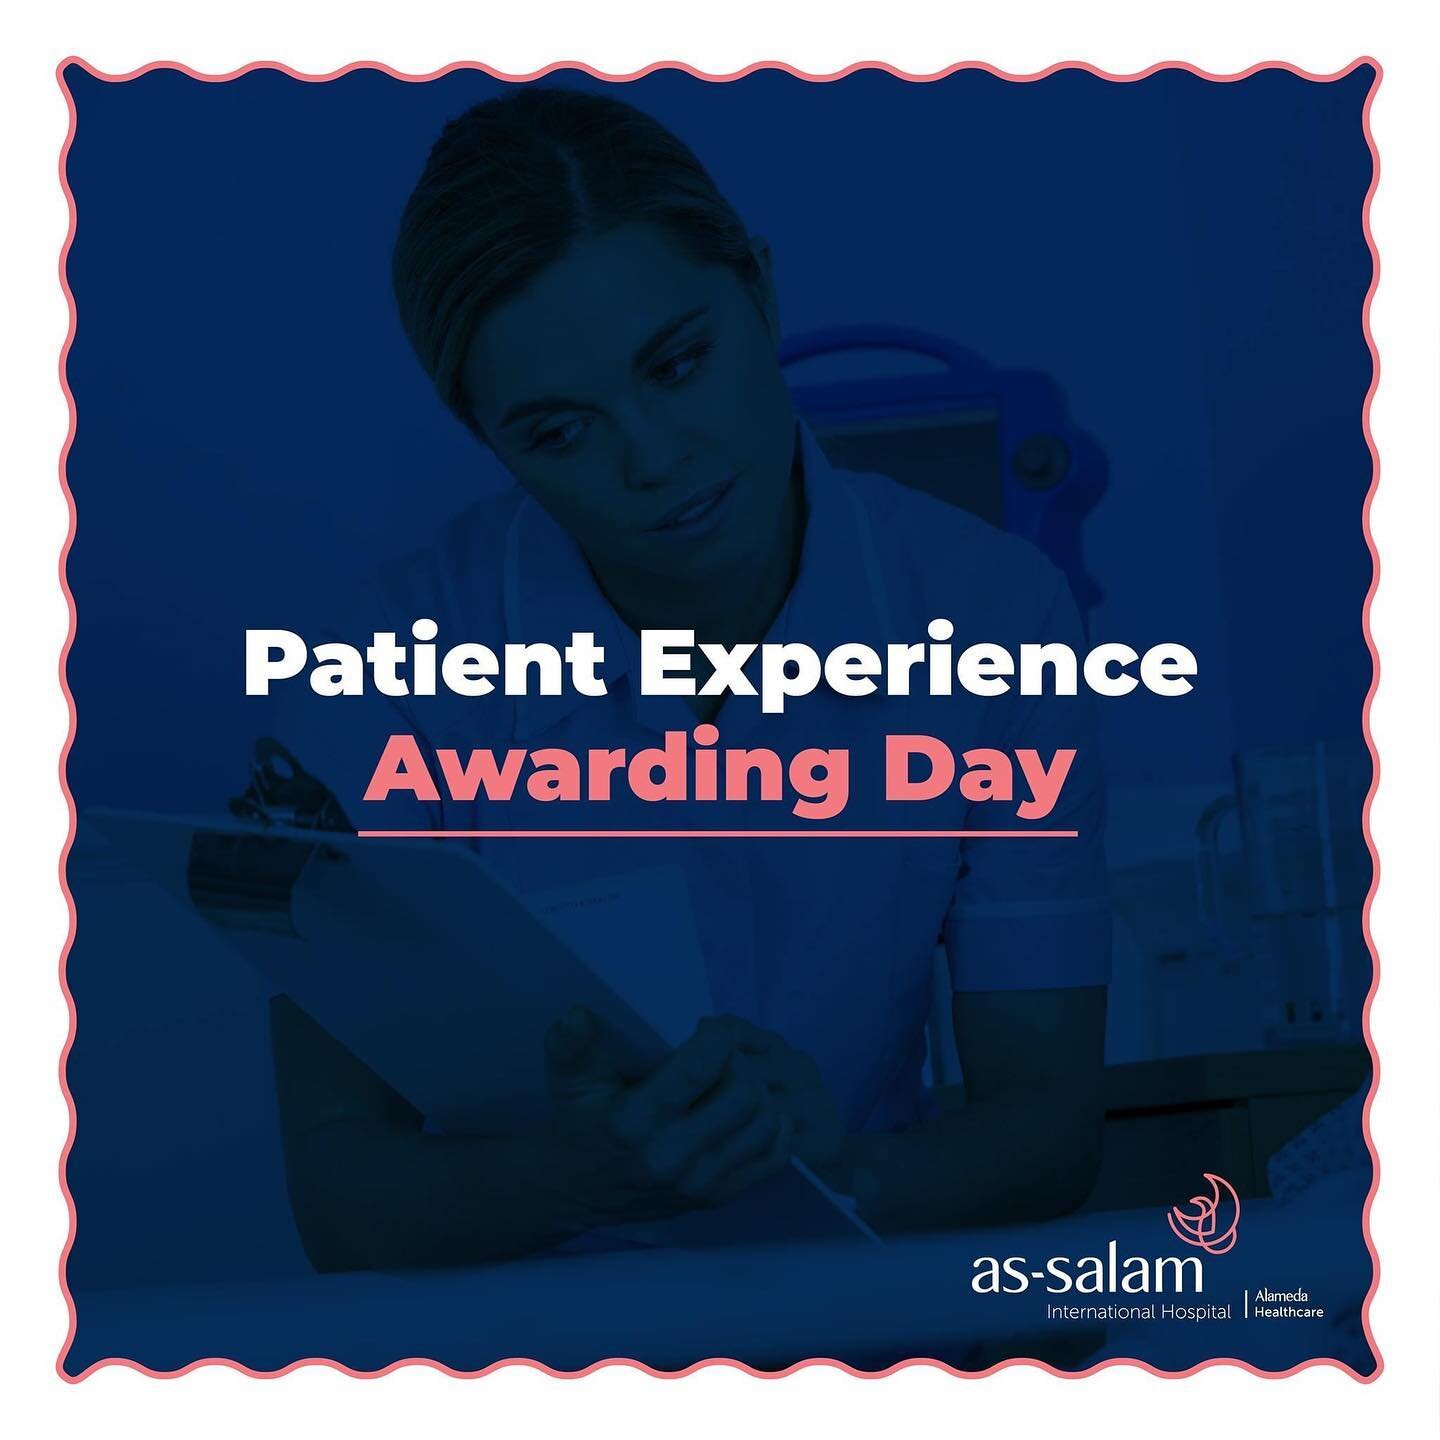 &rlm;An extraordinary patients experience at As-Salam International Hospital!
&rlm;At its quarterly event, As-Salam International Hospital celebrated the departments, and floors that showed outstanding effort in improving patients' experience through